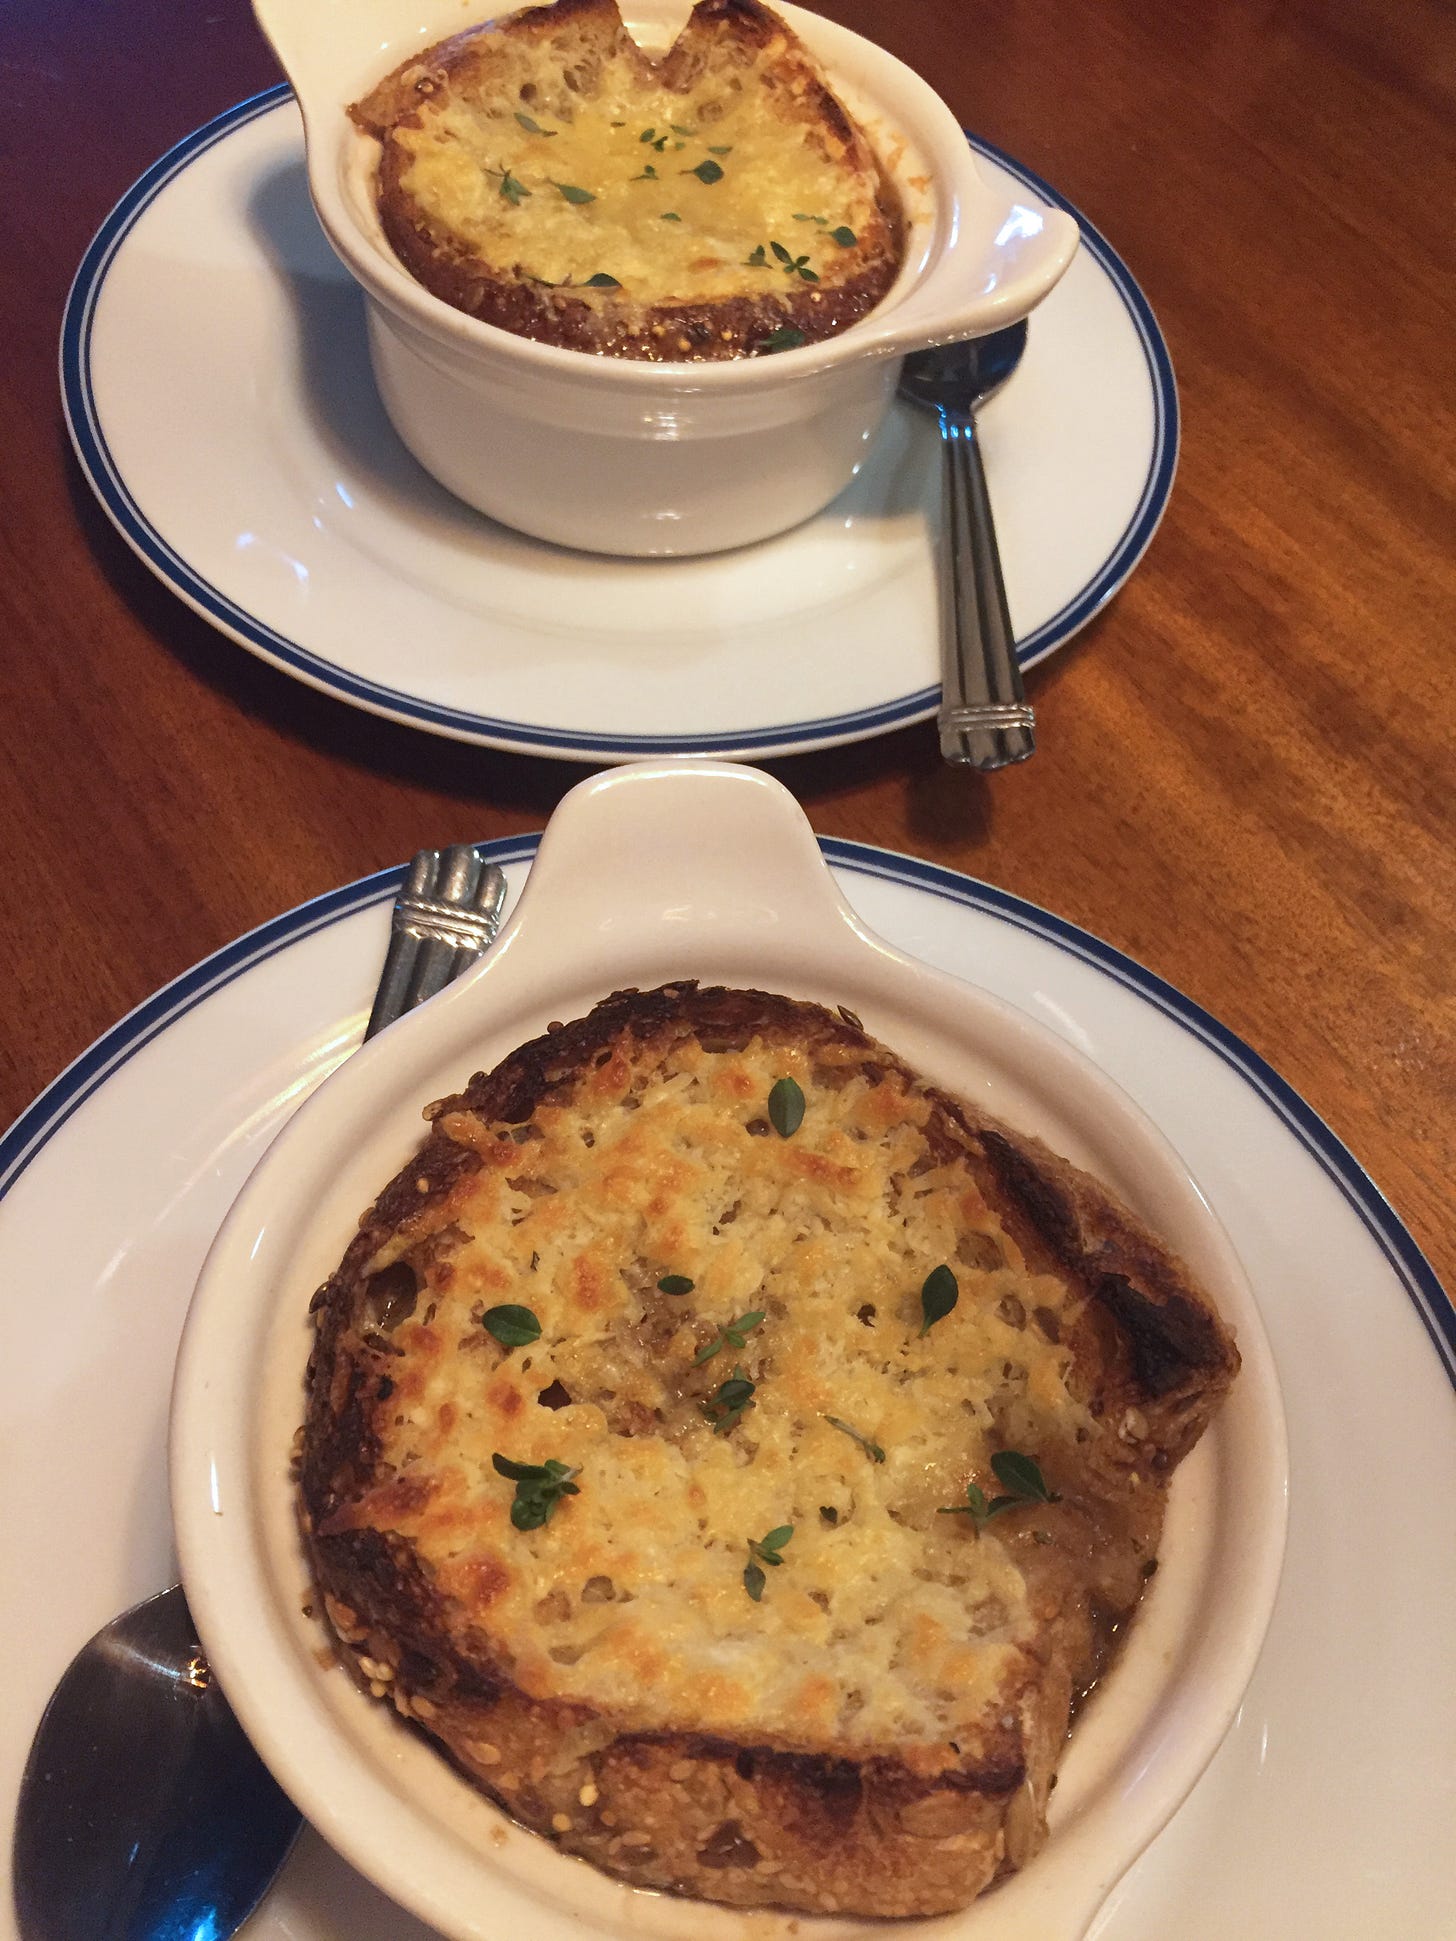 two bowls of French onion soup in traditional white bowls with handles rest on white plates. Browned, melted cheese on toast sits atop the soup.